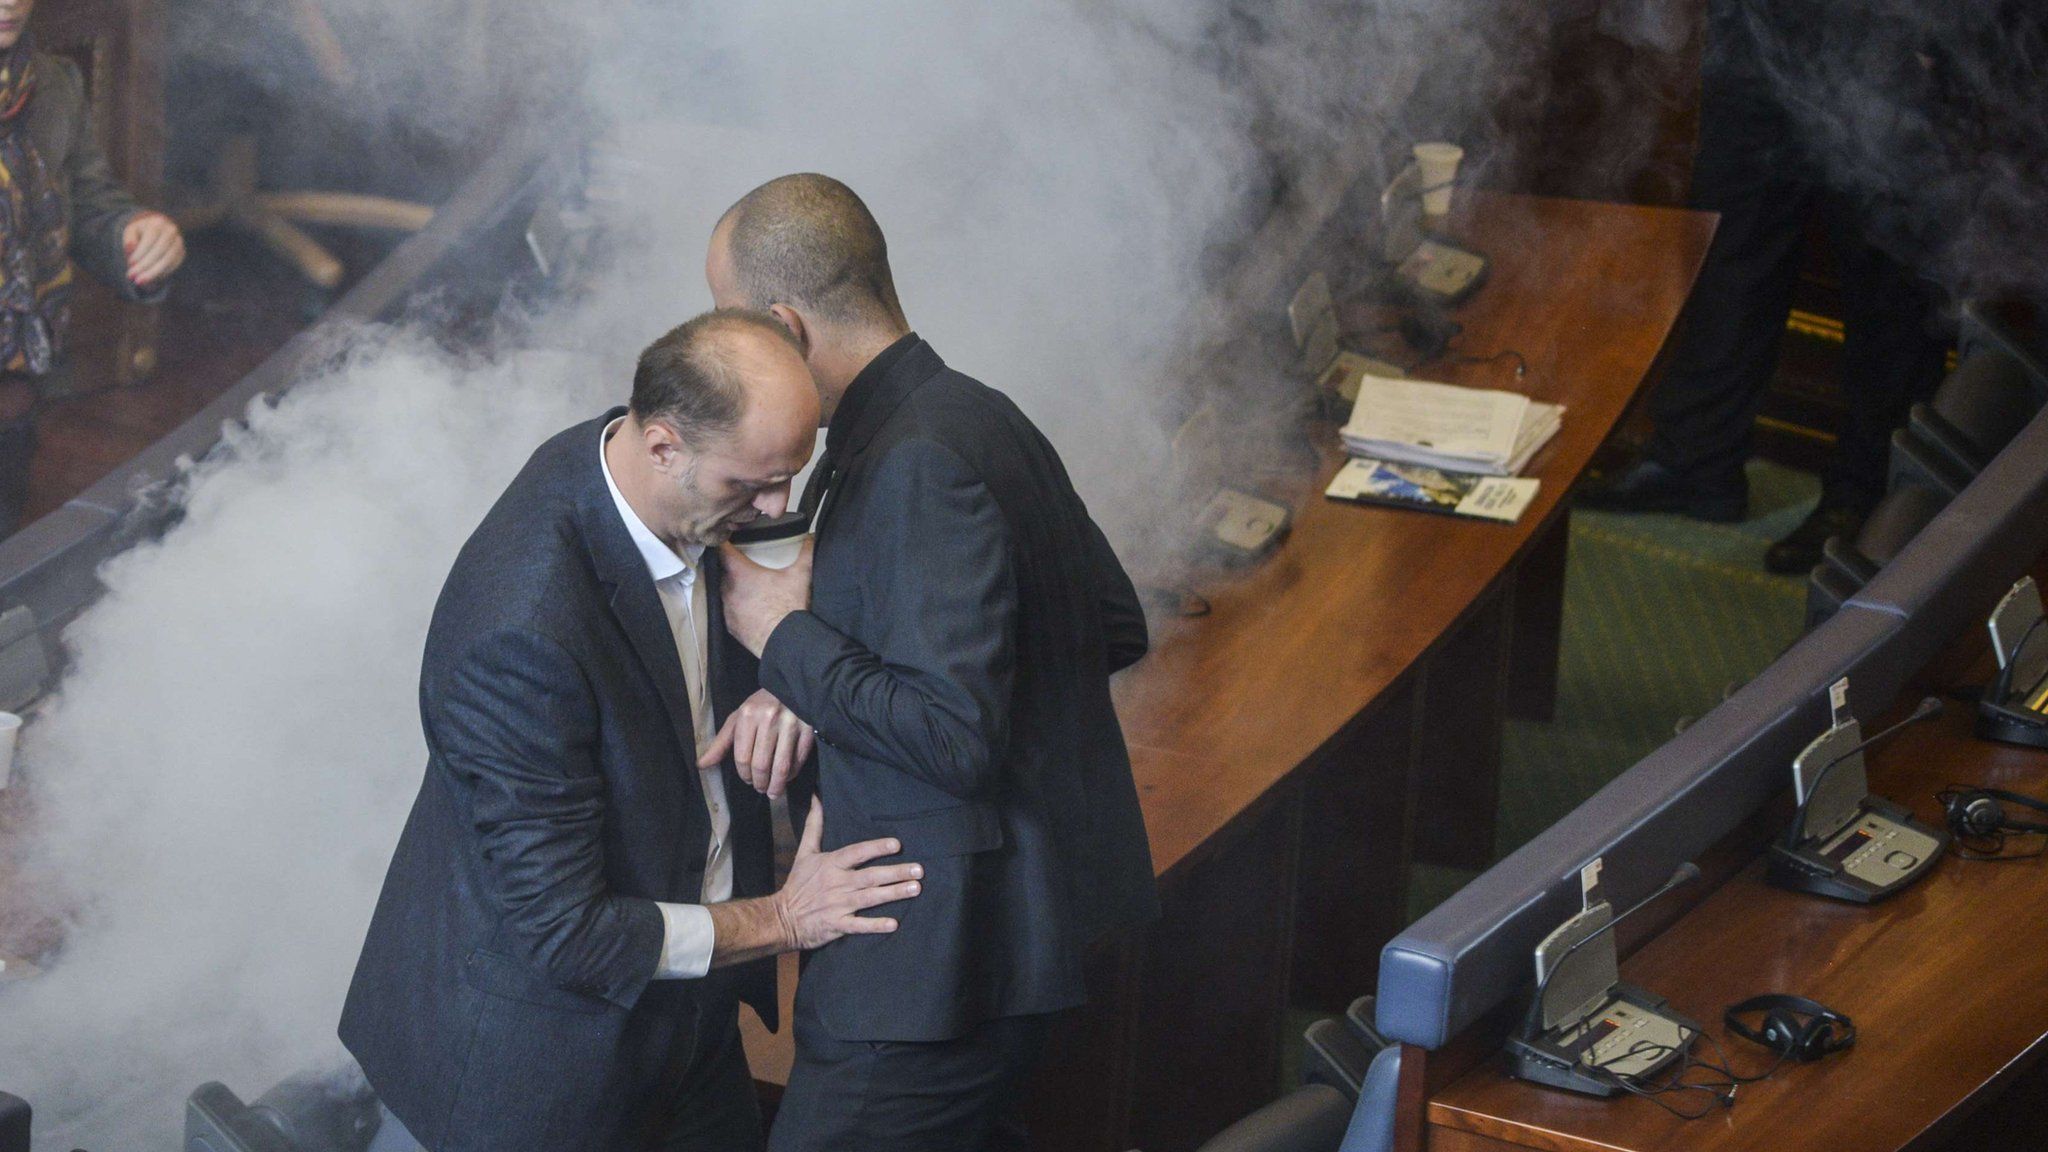 Kosovo MPs leave parliament after tear gas is let off (30 Nov)